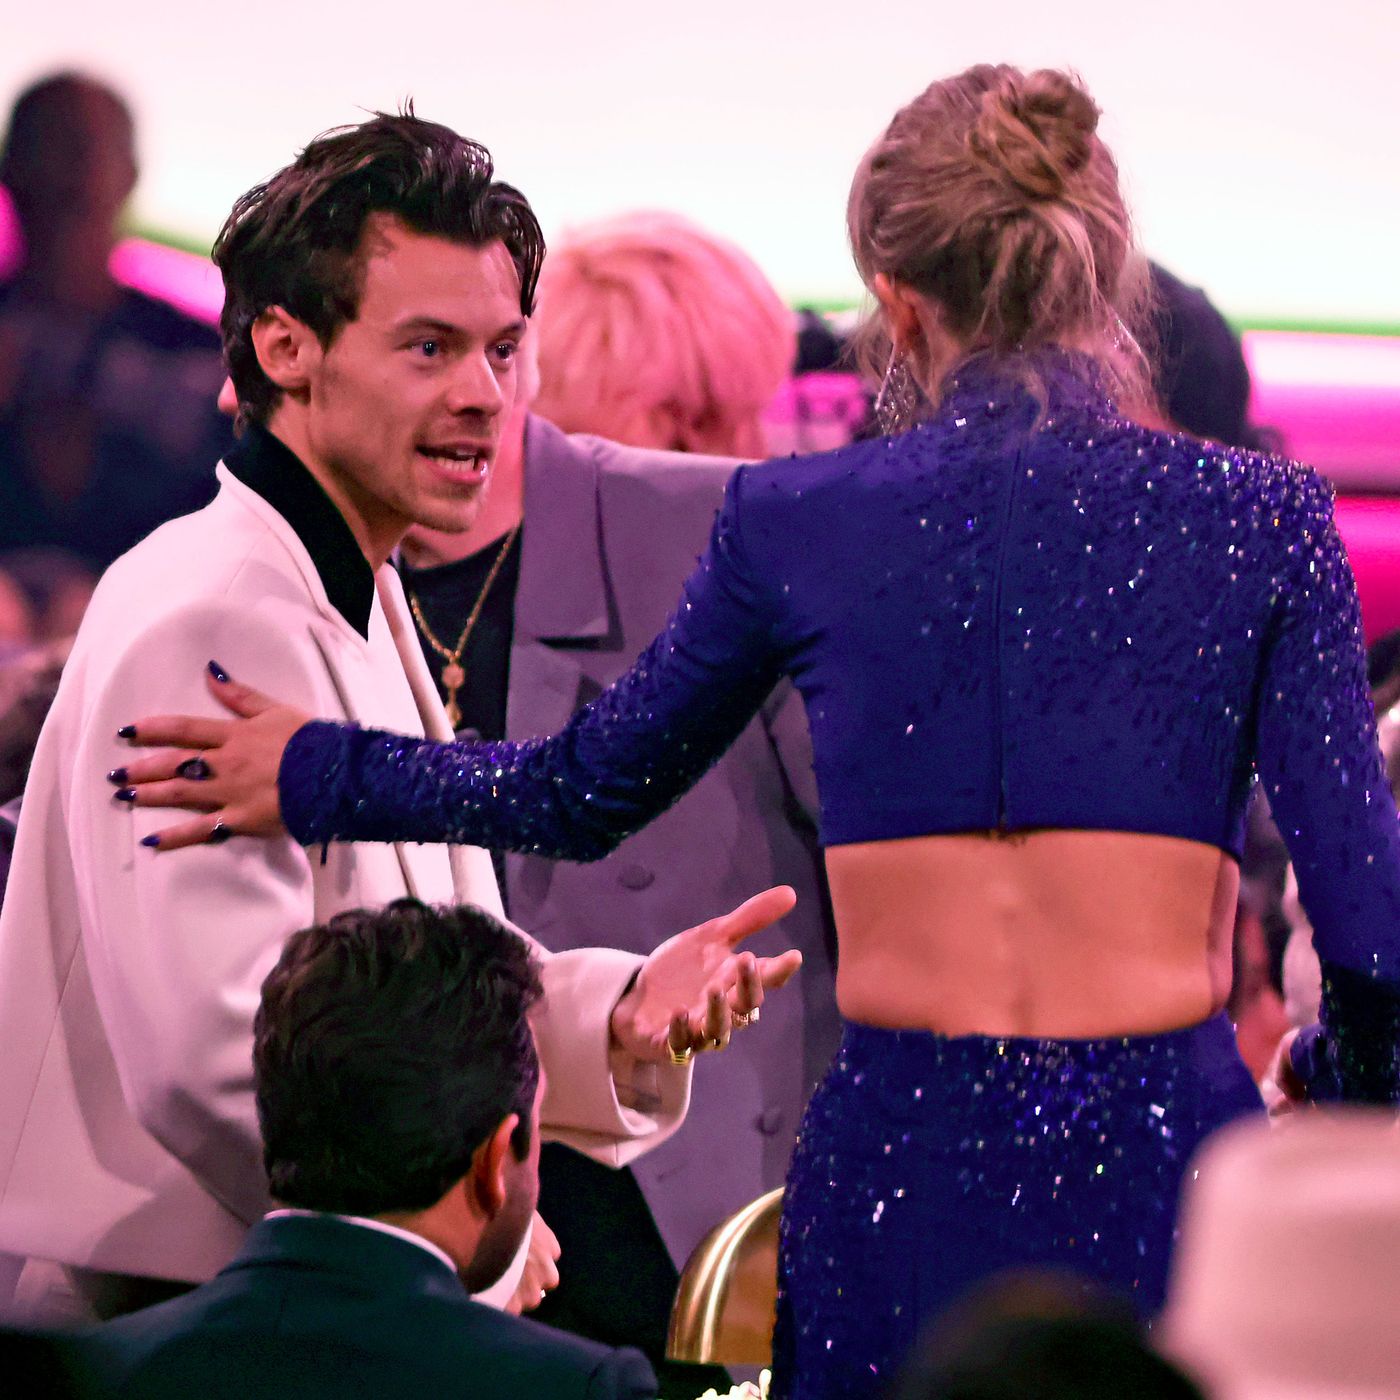 Taylor Swift: Harry Styles Enters His 1989 Era One Last Time